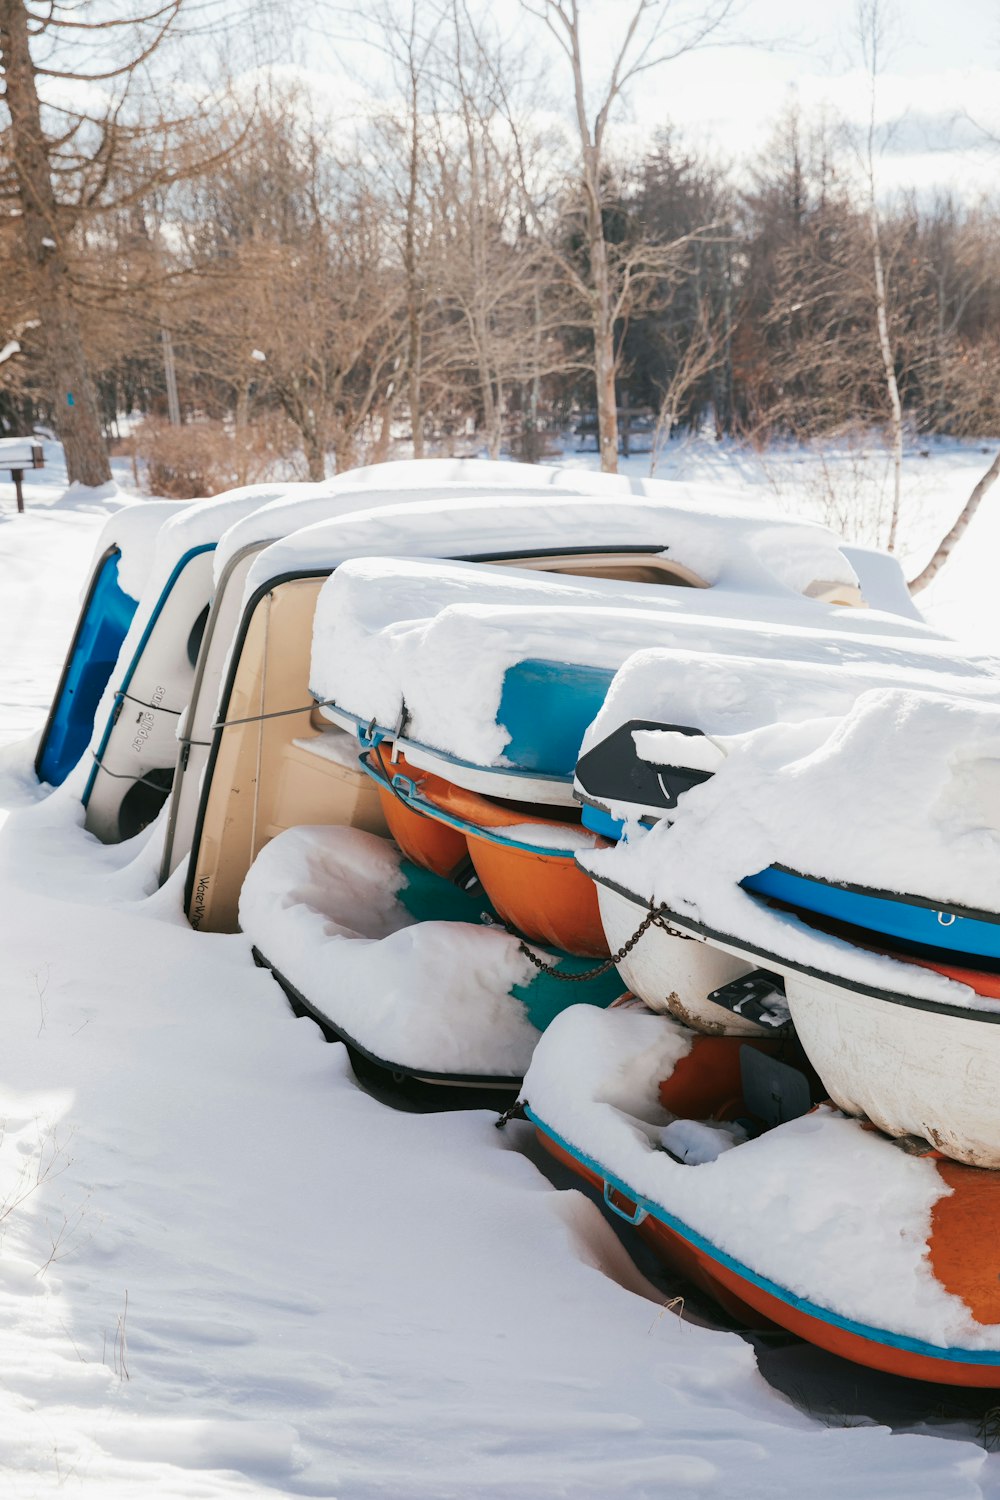 a row of snow covered boats sitting in the snow